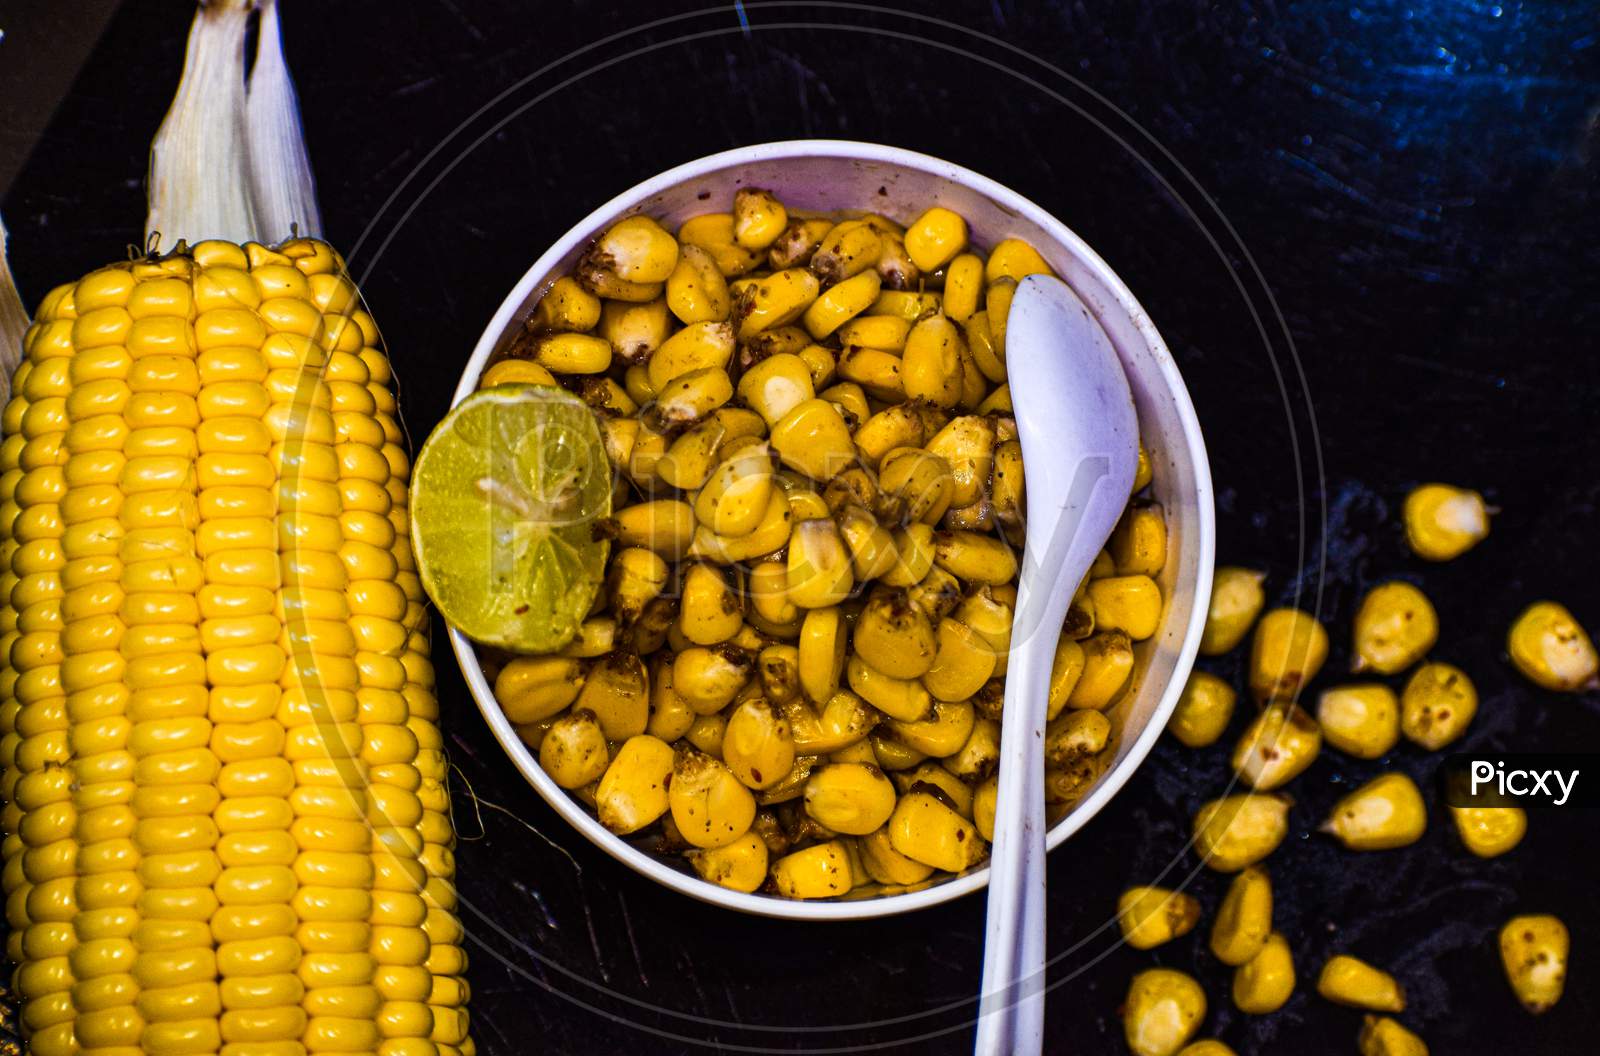 A cup of sweet corn with maize